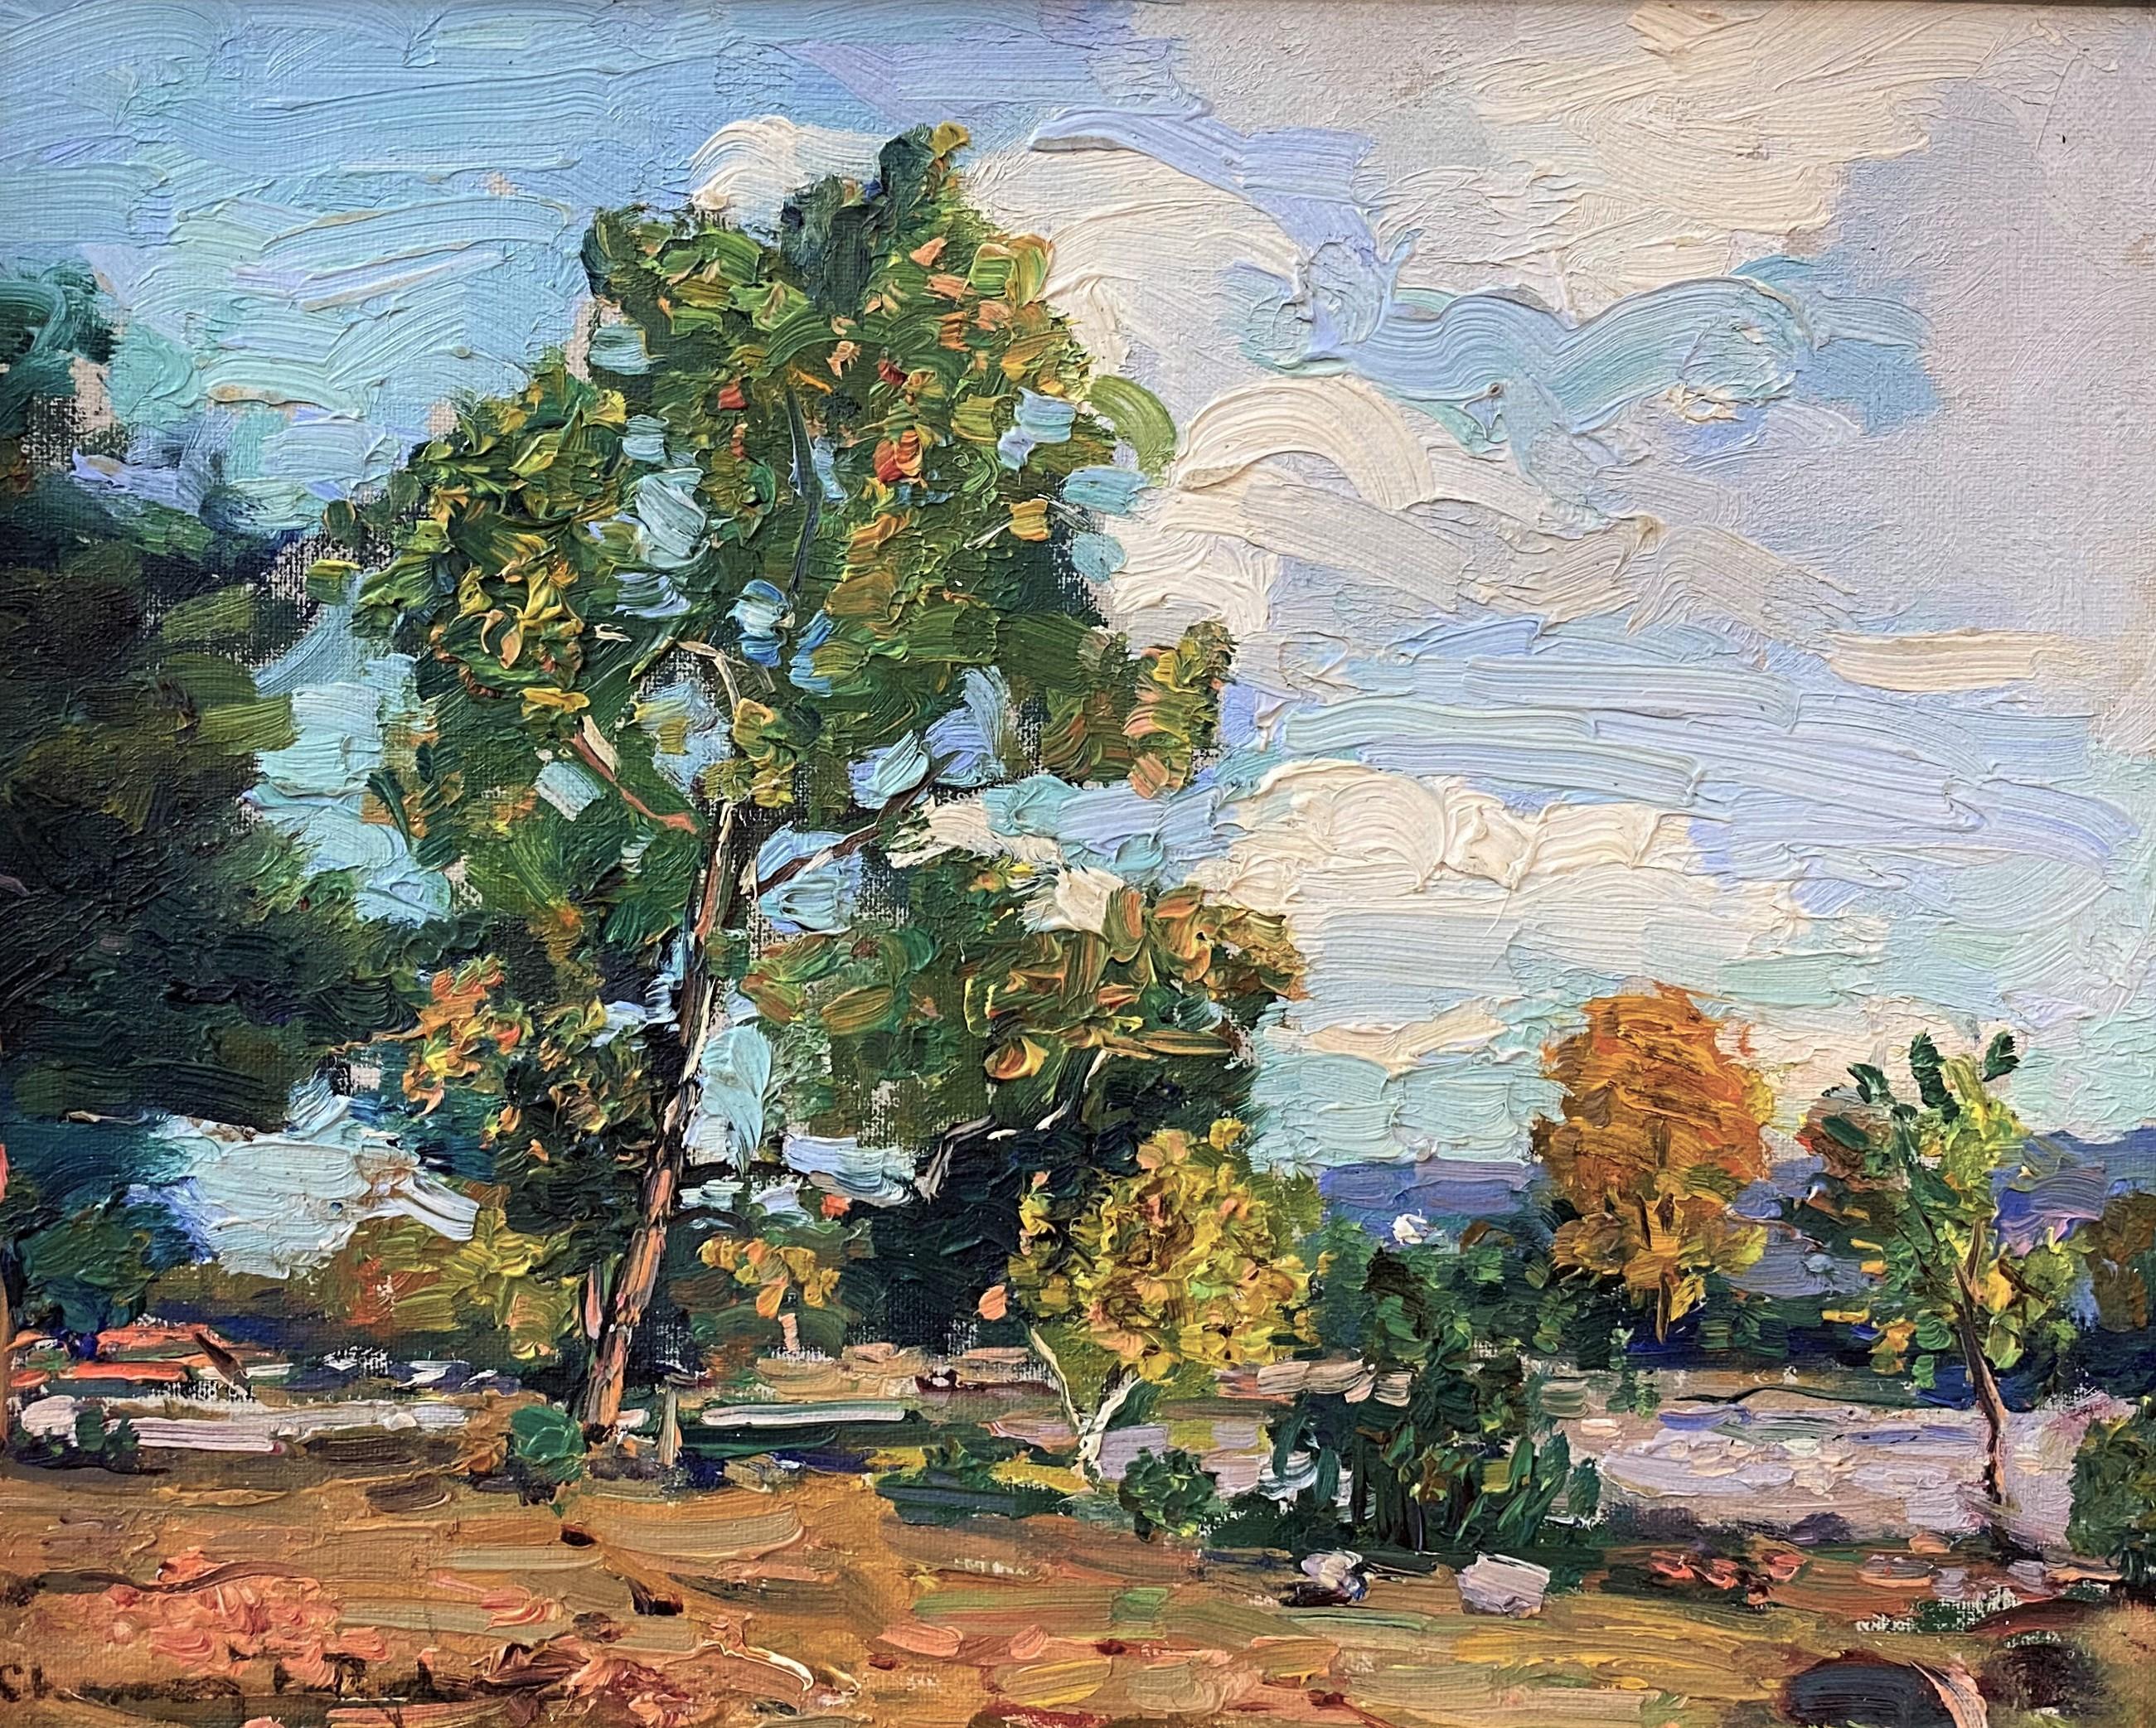 Wilton, N.H., End of Summer - American Impressionist Art by Chauncey Foster Ryder